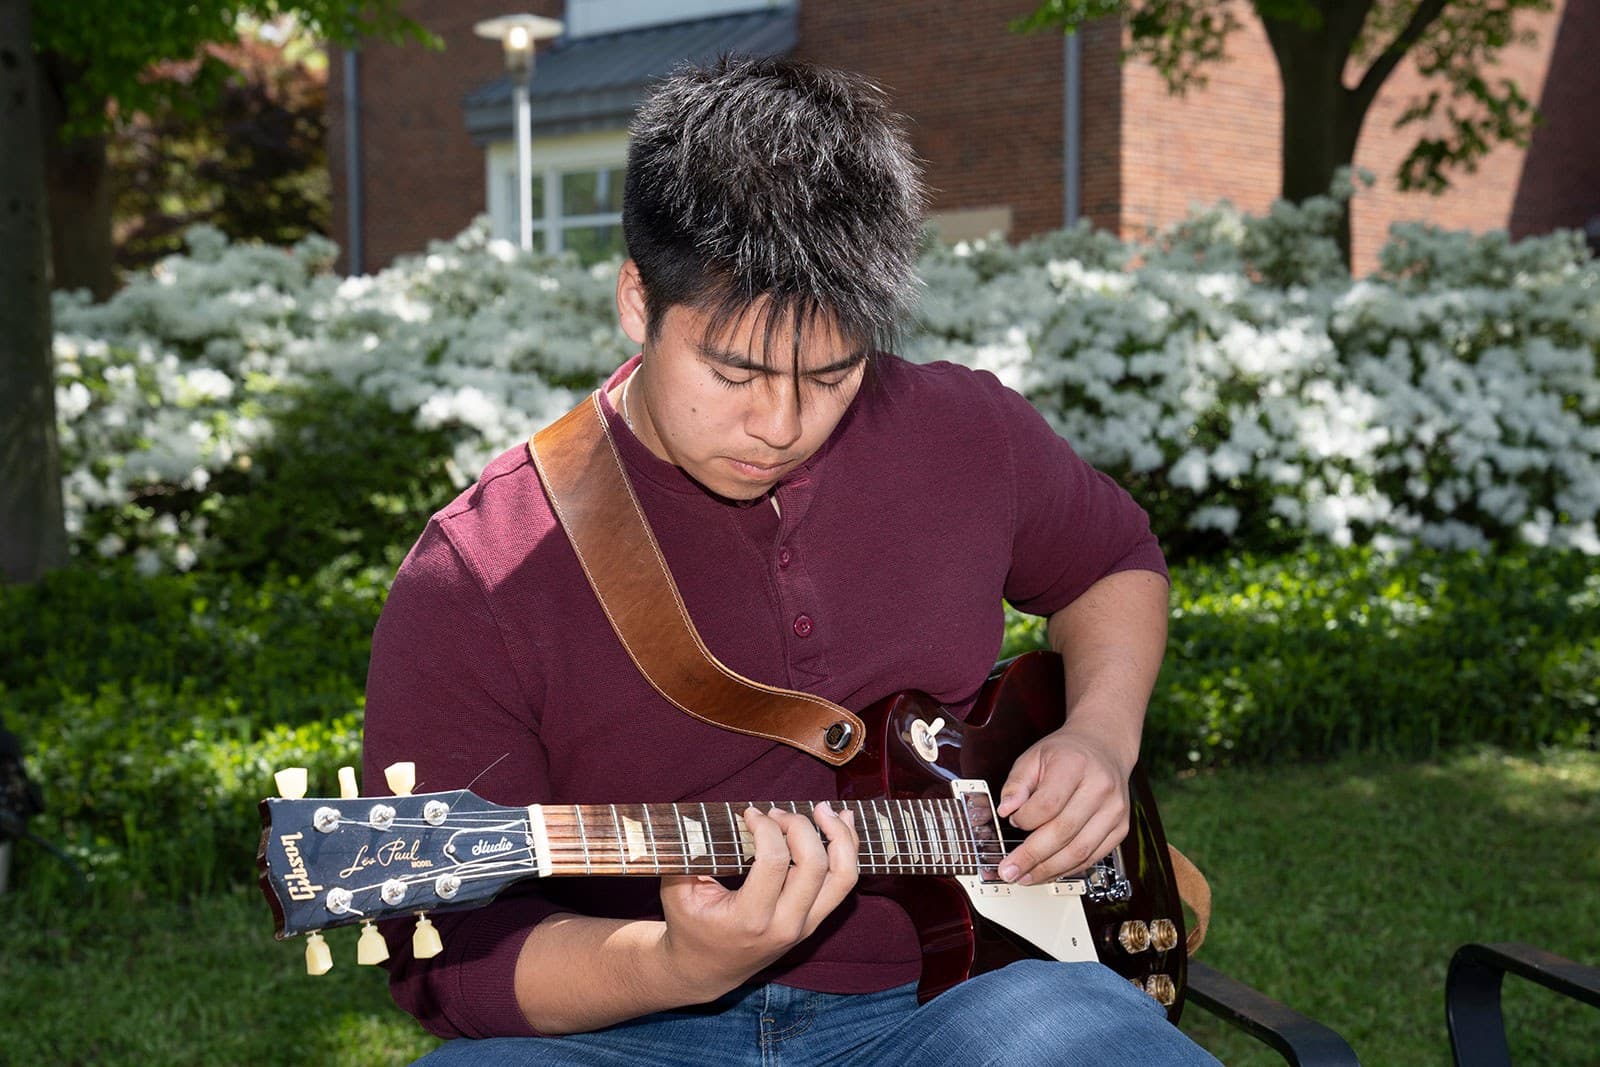 An asian male student plays electric guitar in a garden.